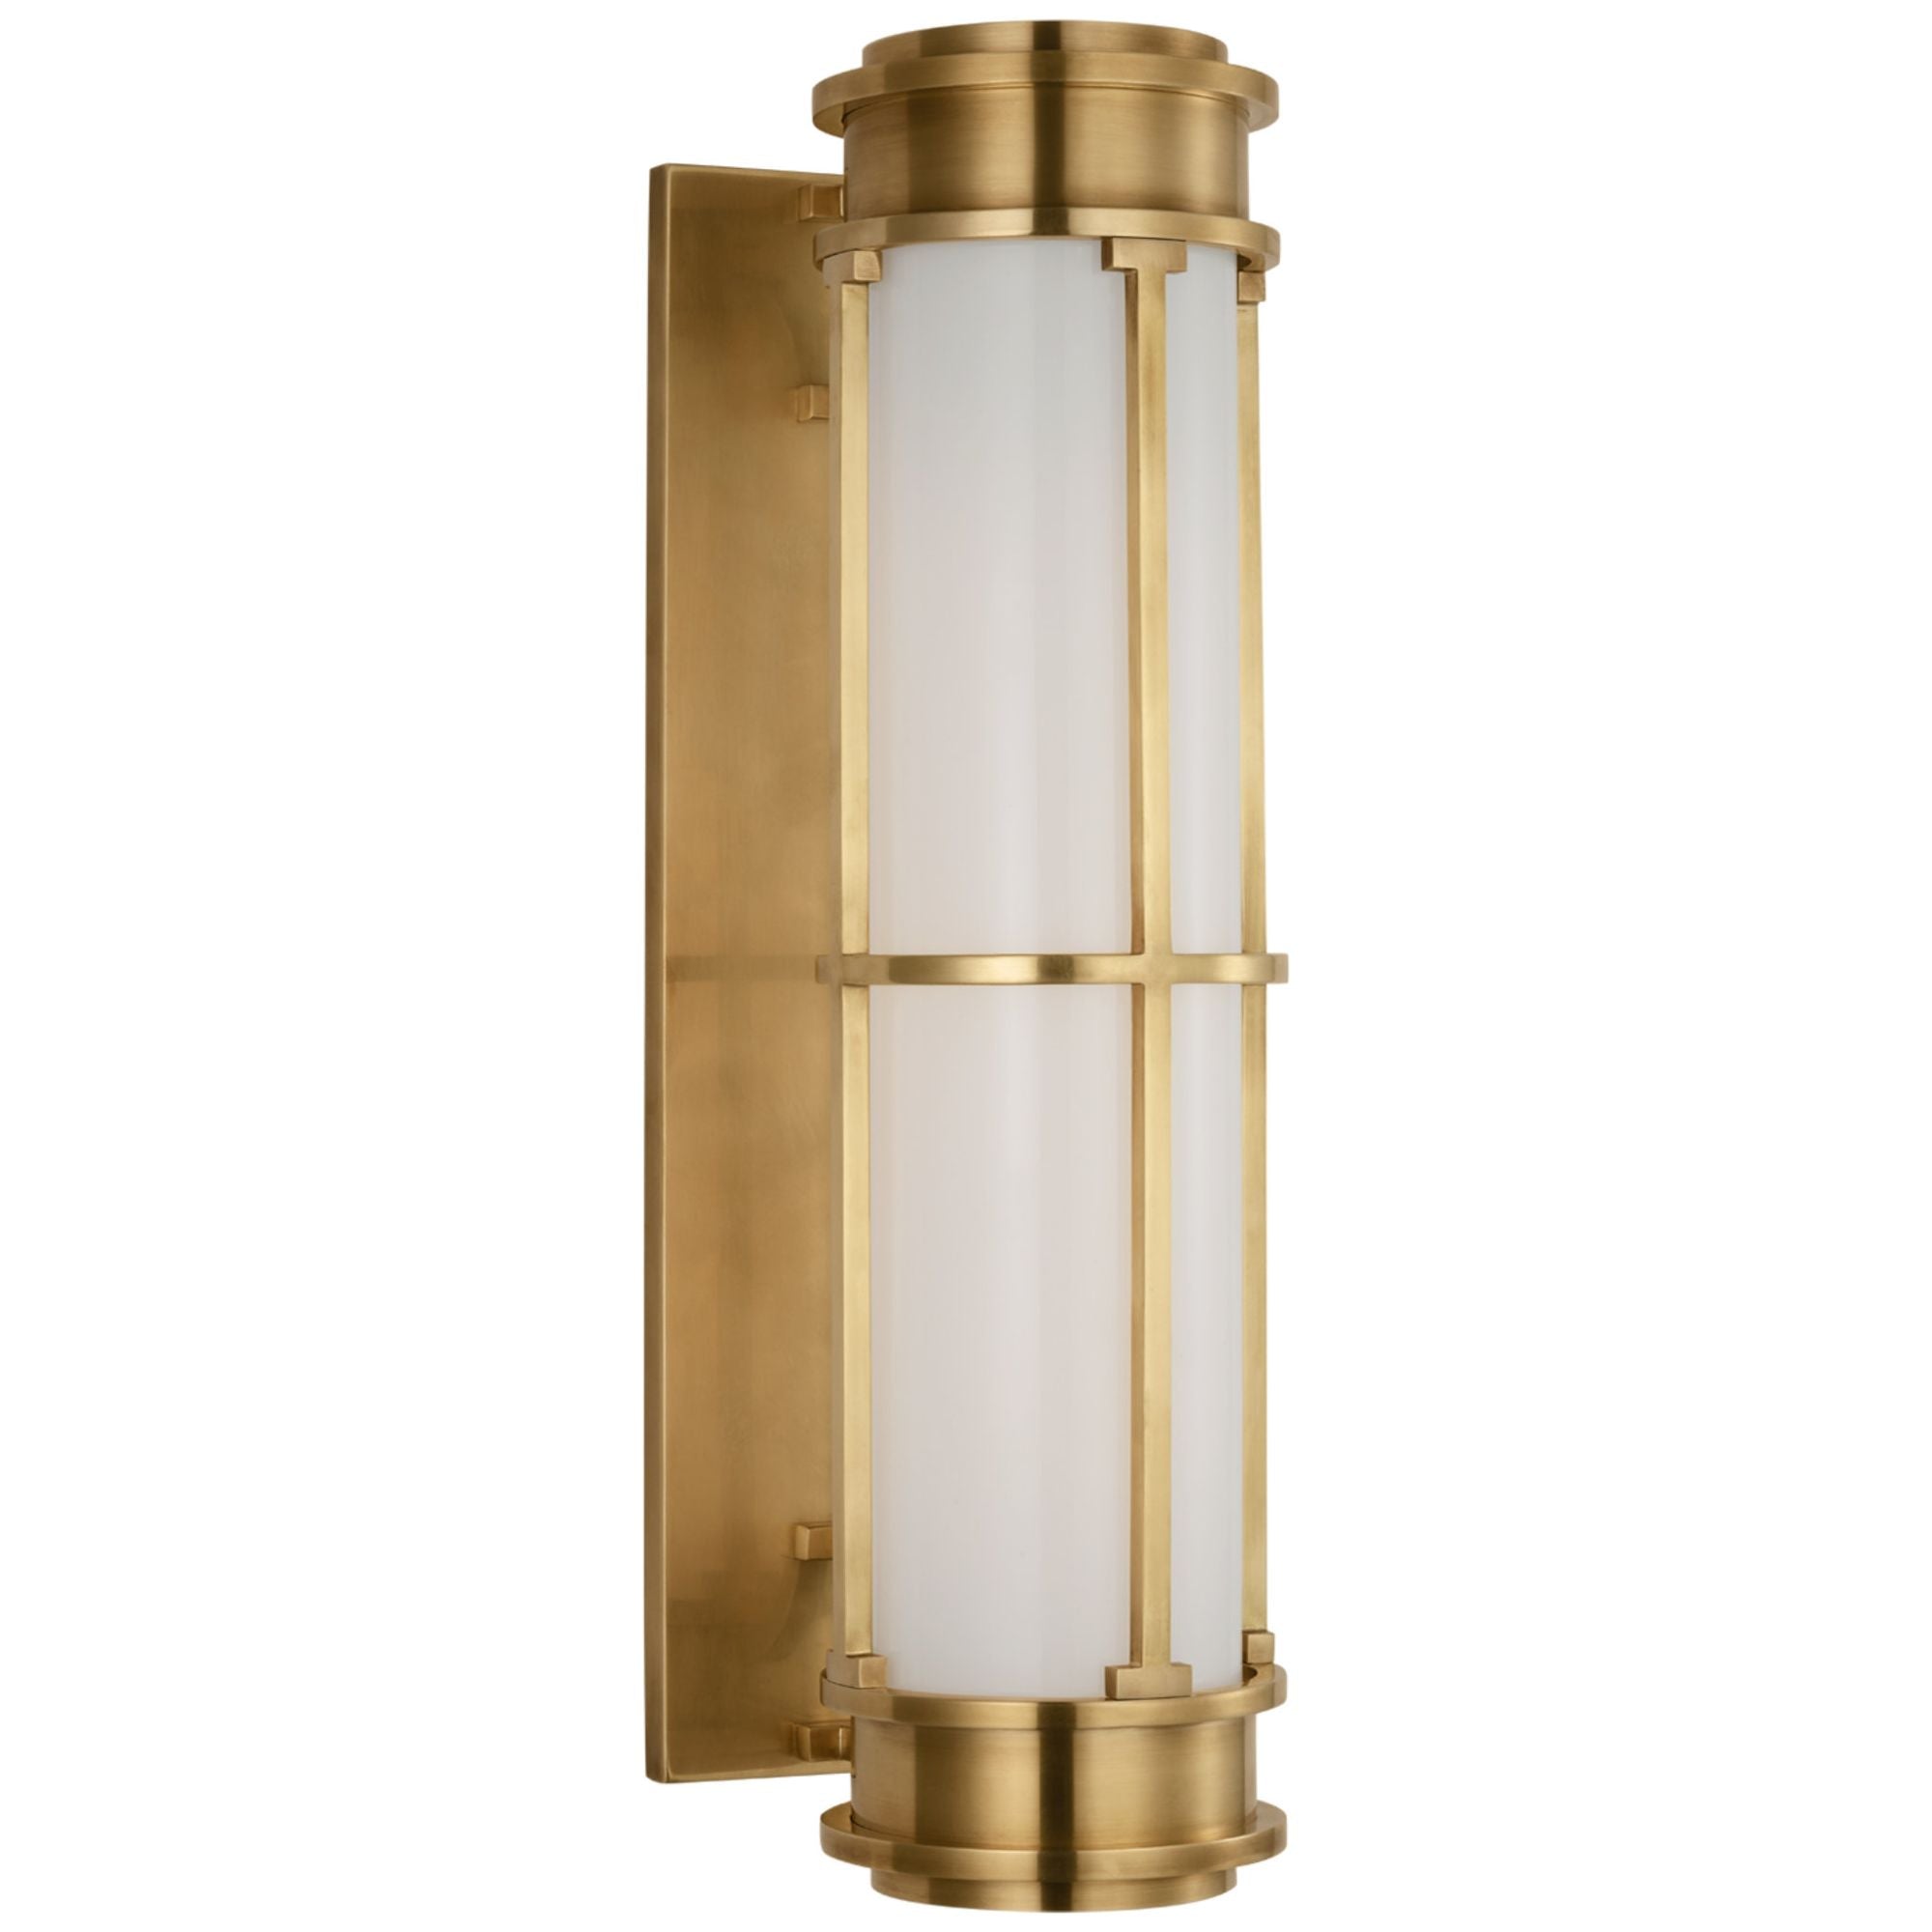 Chapman & Myers Gracie 19" Linear Sconce in Antique-Burnished Brass with White Glass